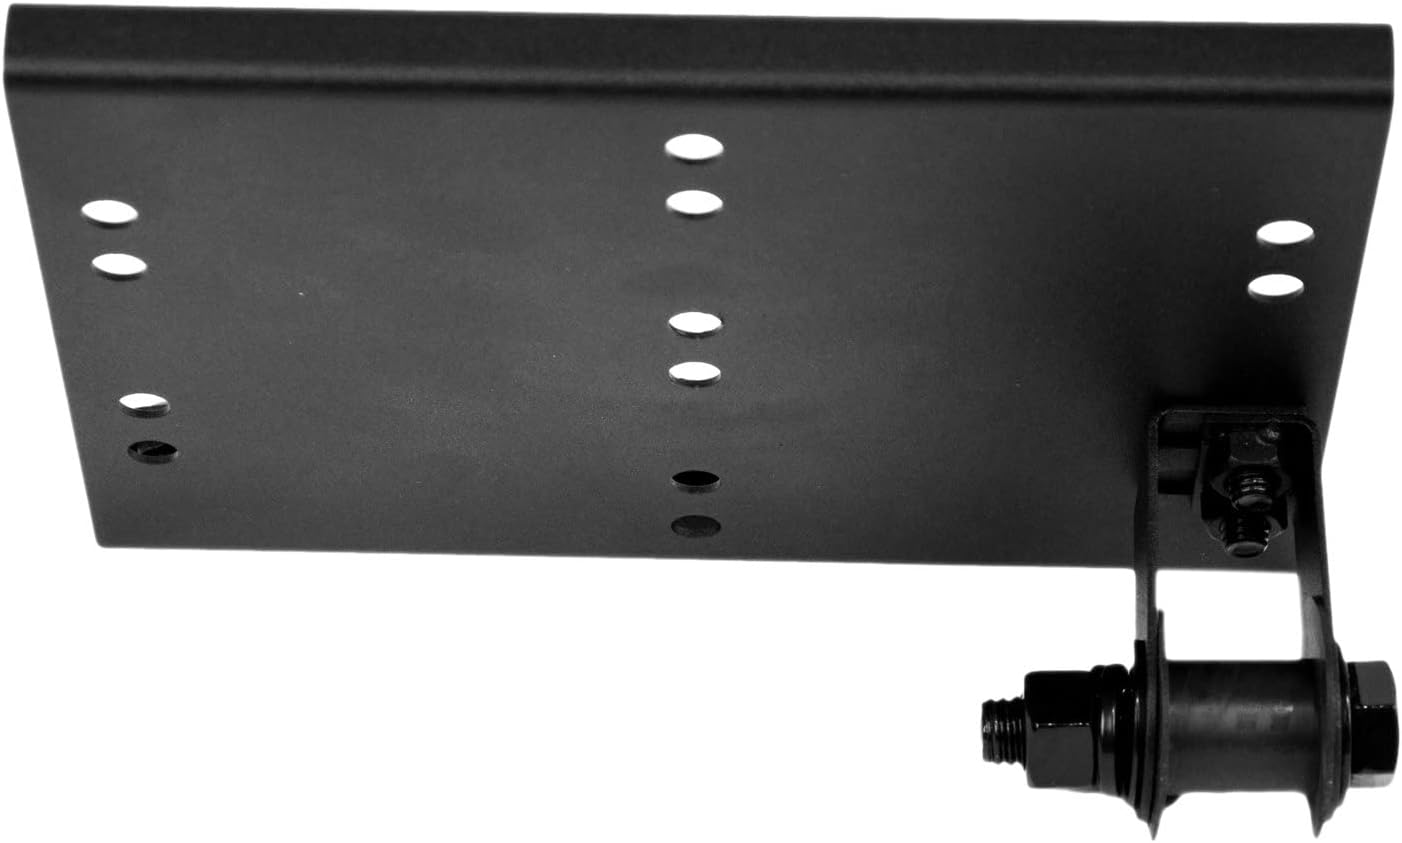 Ford Bronco Mod bumper front license plate mount - what’s everyone using? 1688304865048